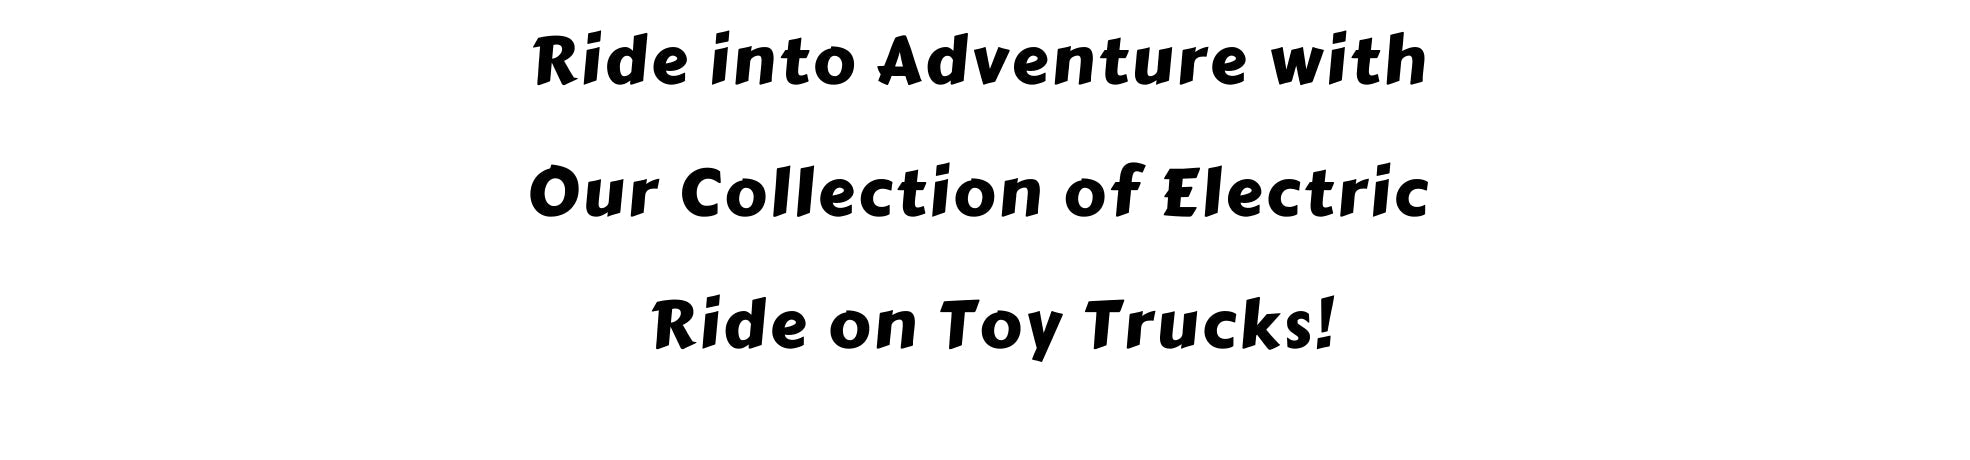 Ride into Adventure with Our Collection of Electric Ride on Toy Trucks!